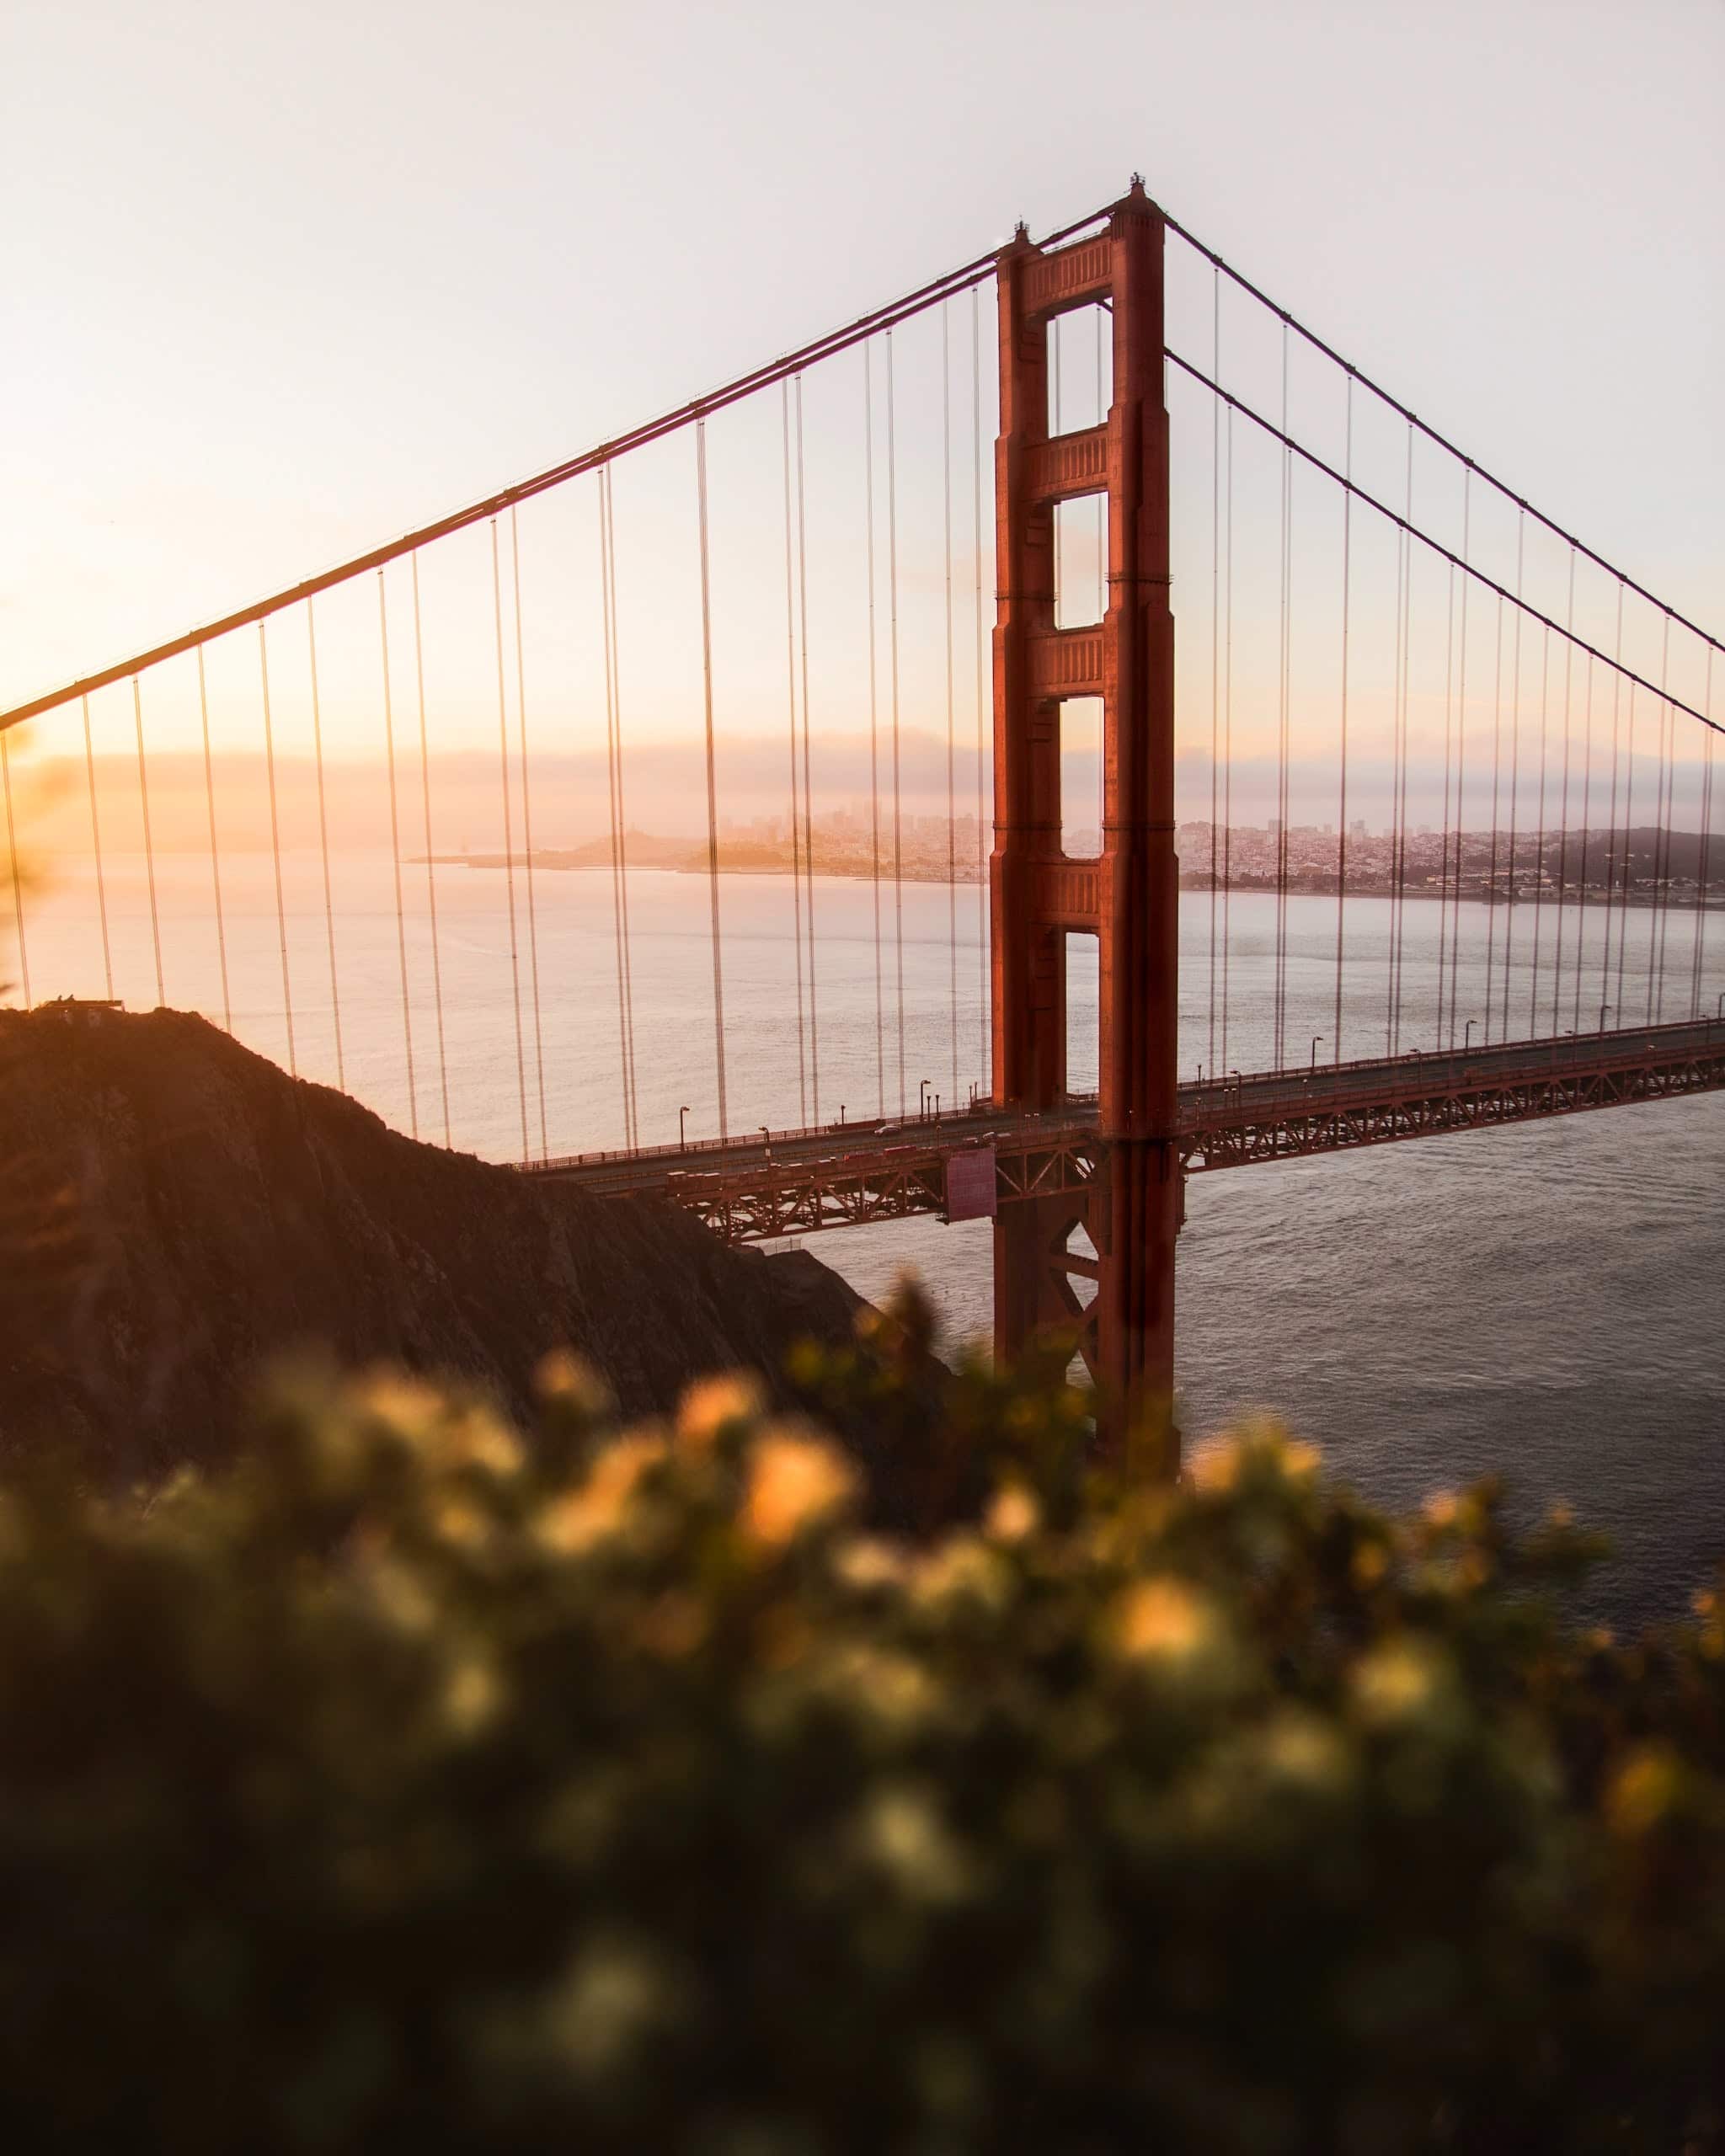 Photo of the Golden Gate Bridge in San Francisco, taken from a grassy hilltop at sunset